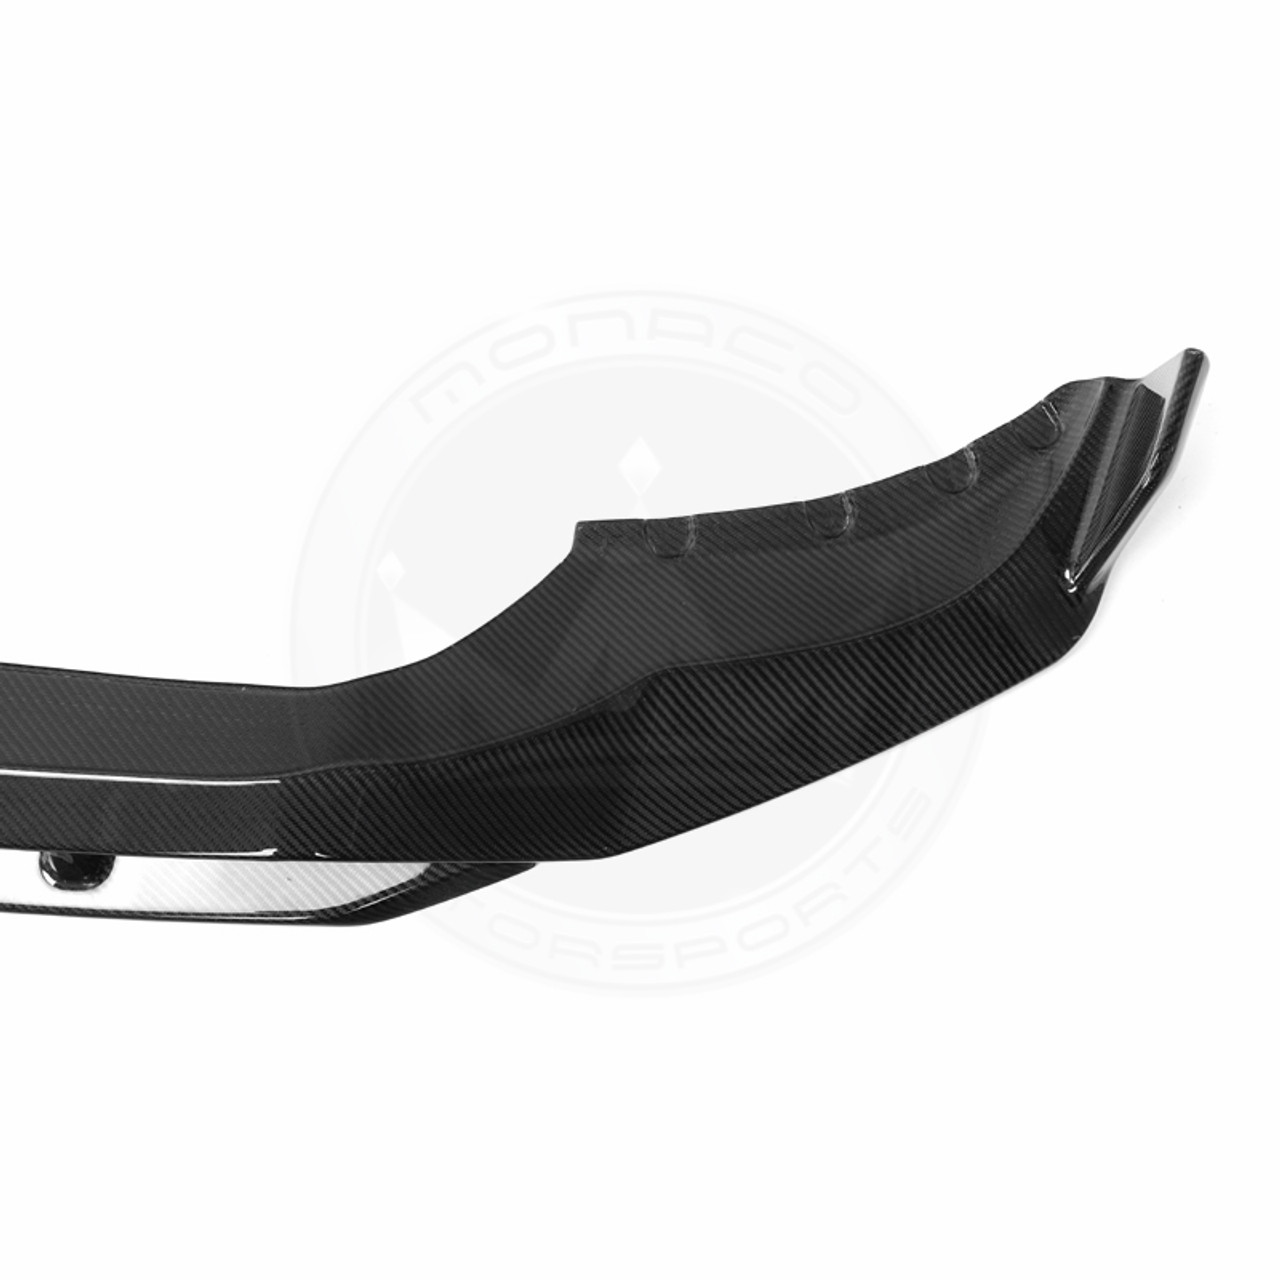  Real Carbon Fiber Front Lip for BMW X5 G05 2019-2021 xDrive40i  xDrive50i M Sport Front Chin Spoiler Splitter Factory Outlet (1PC) :  Automotive